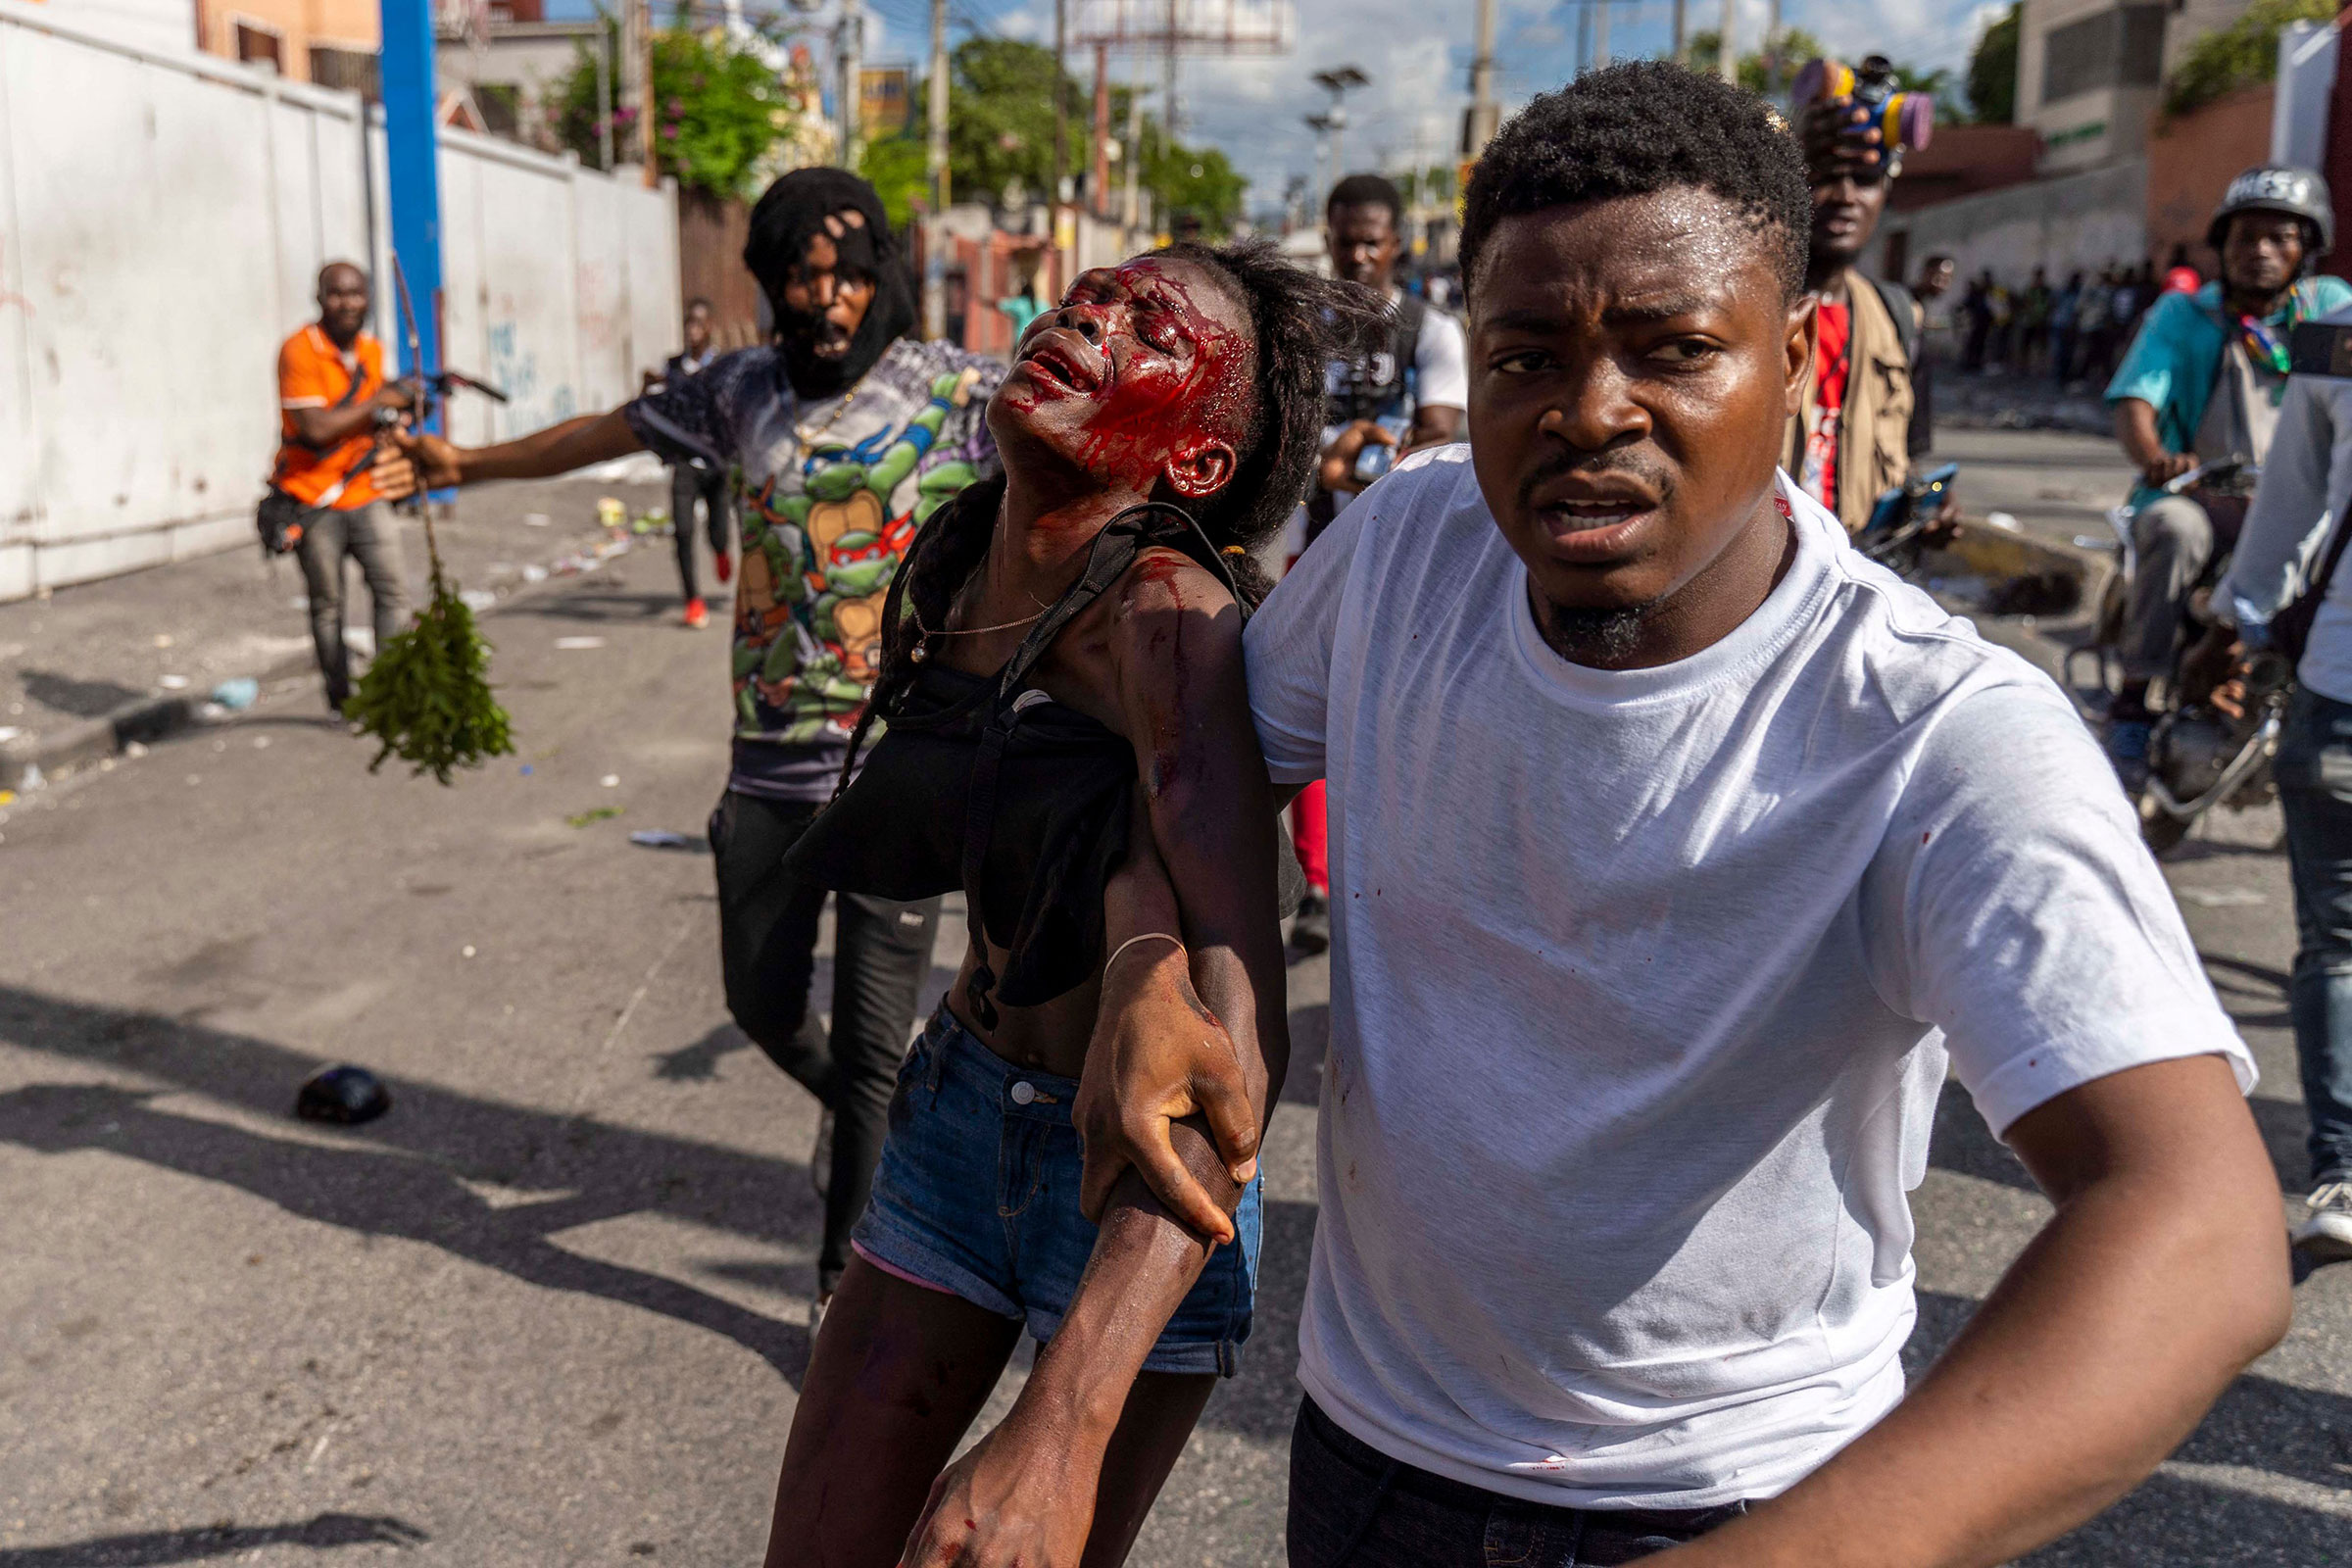 A man assists an injured woman during a protest against Haitian Prime Minister Ariel Henry calling for his resignation, in Port-au-Prince, Haiti, on Oct. 10. (Richard Pierrin—AFP/Getty Images)